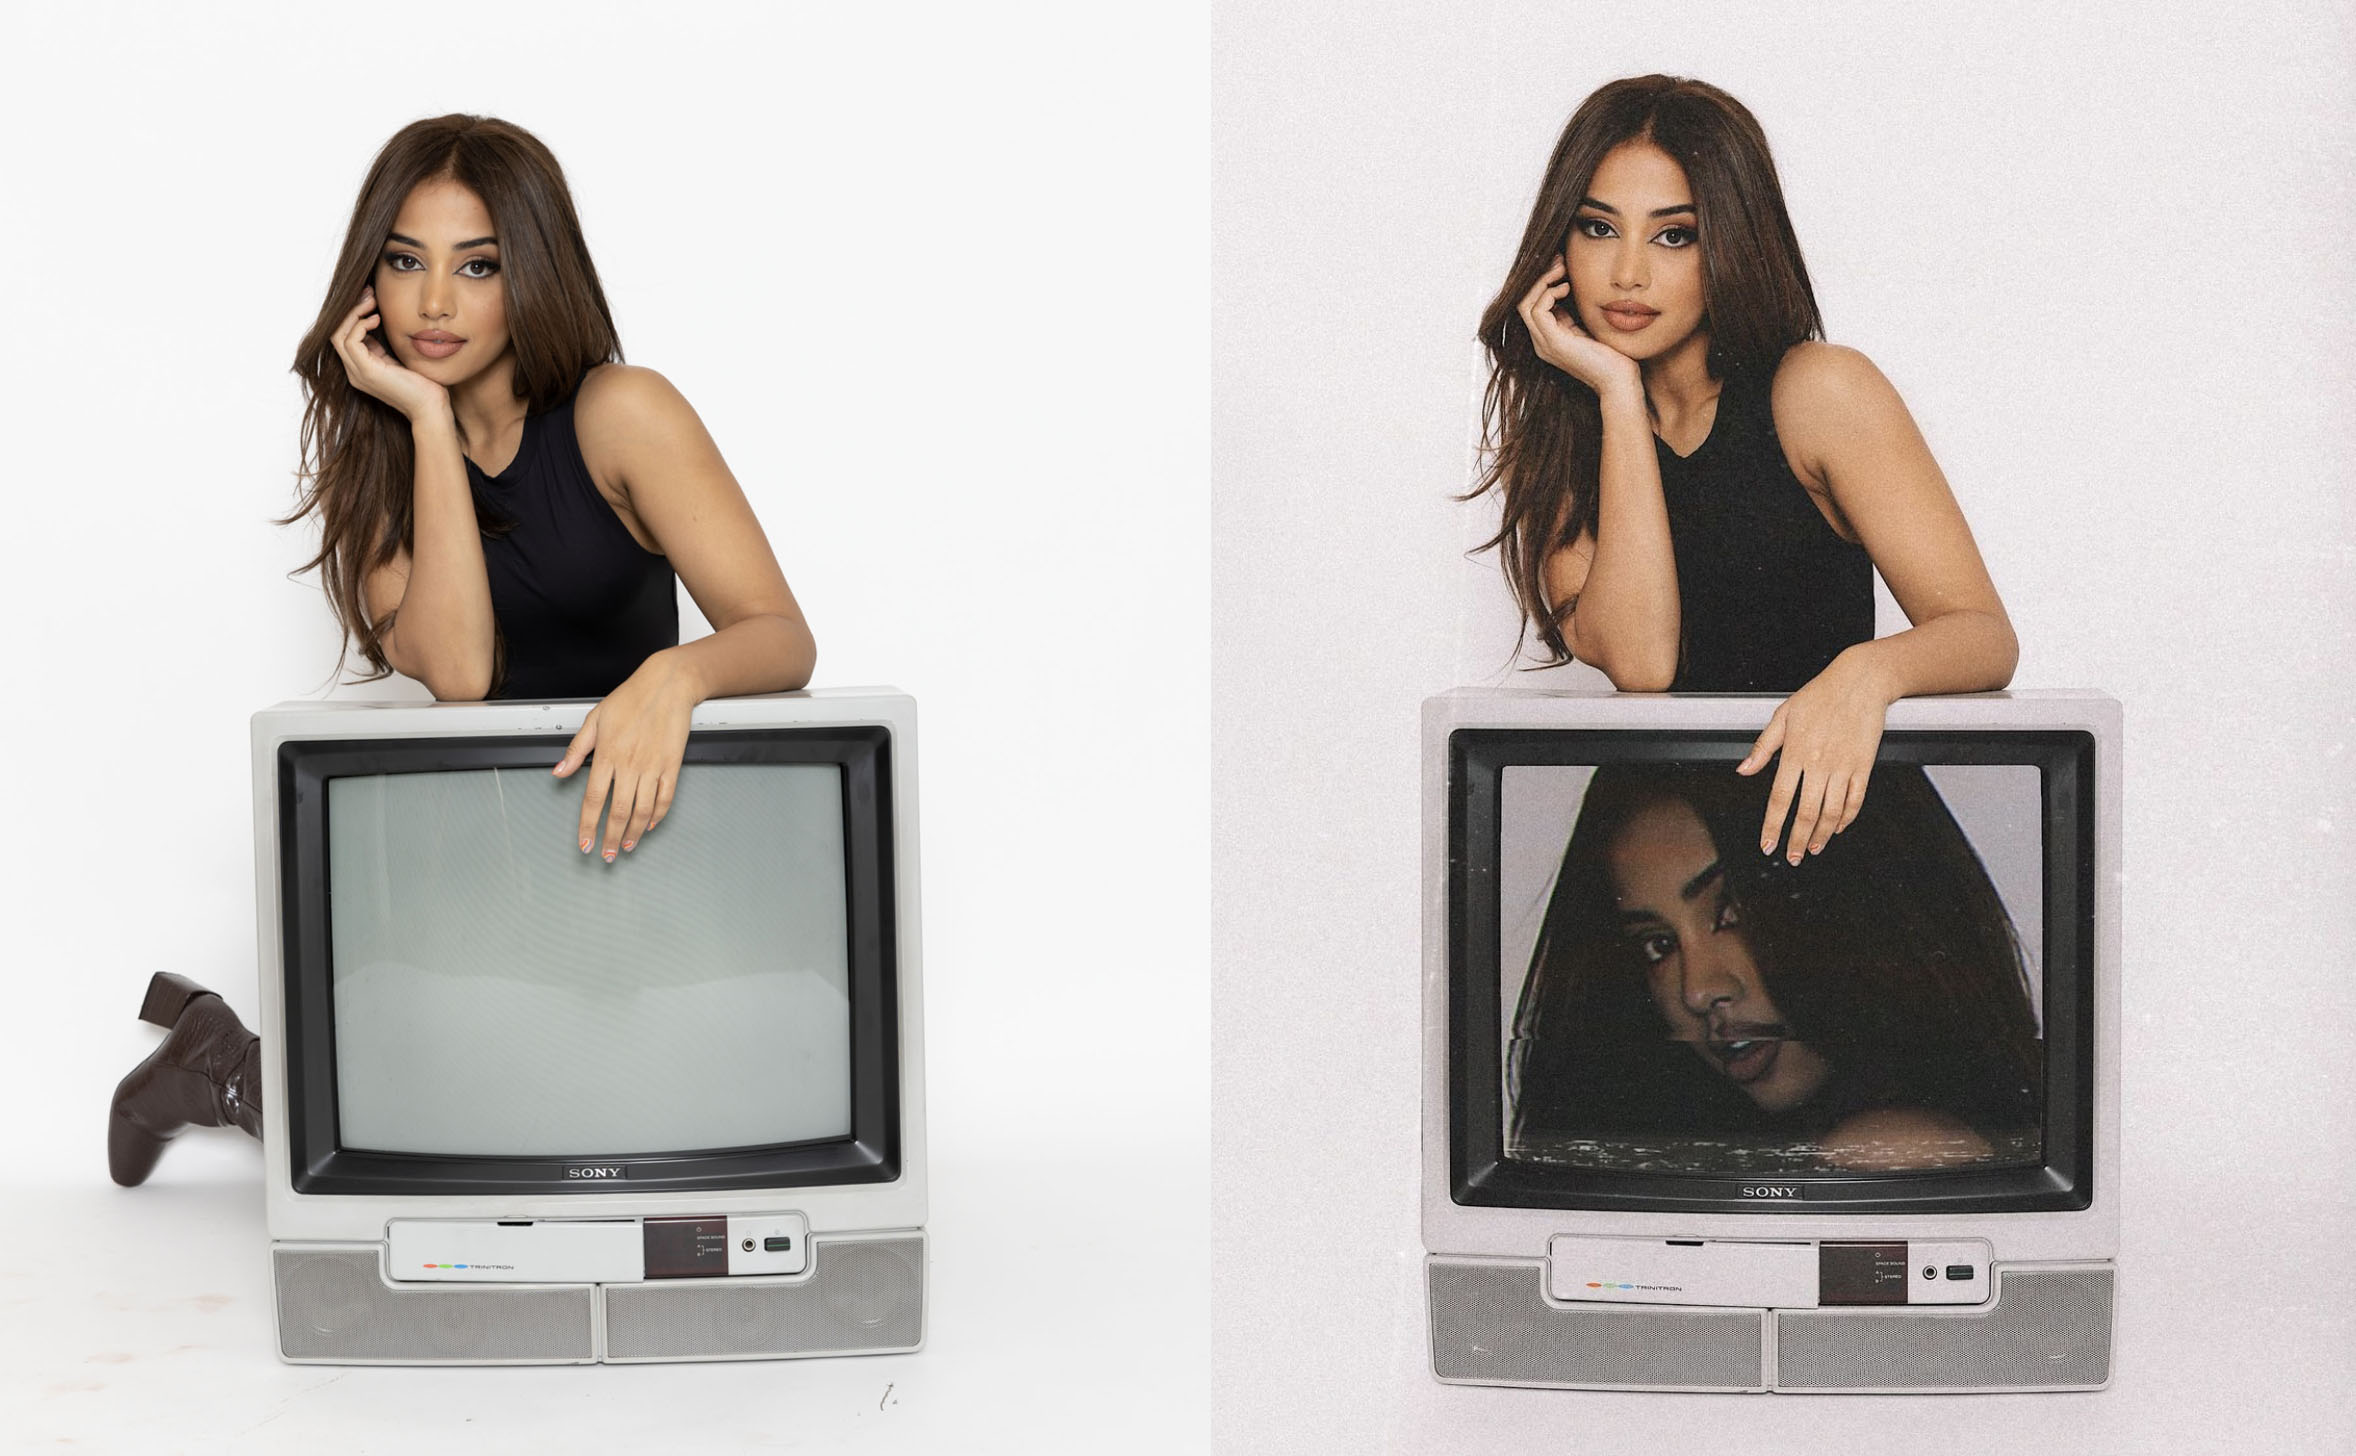 A woman with a Photoshopped picture of herself on the television